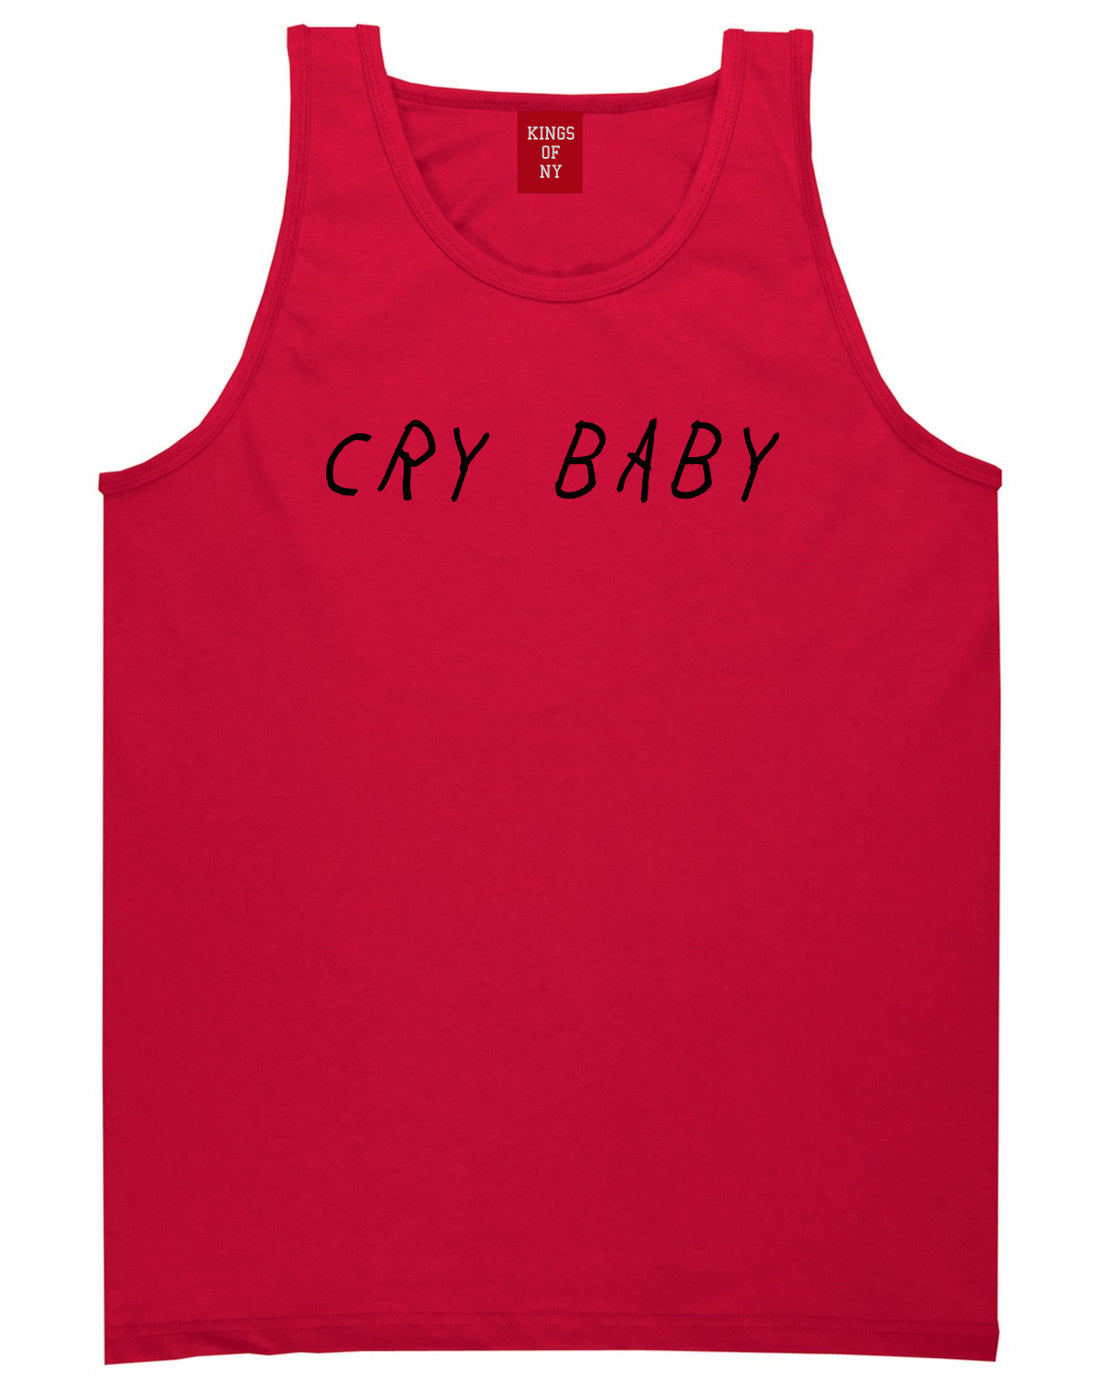 Cry_Baby Mens Red Tank Top Shirt by Kings Of NY